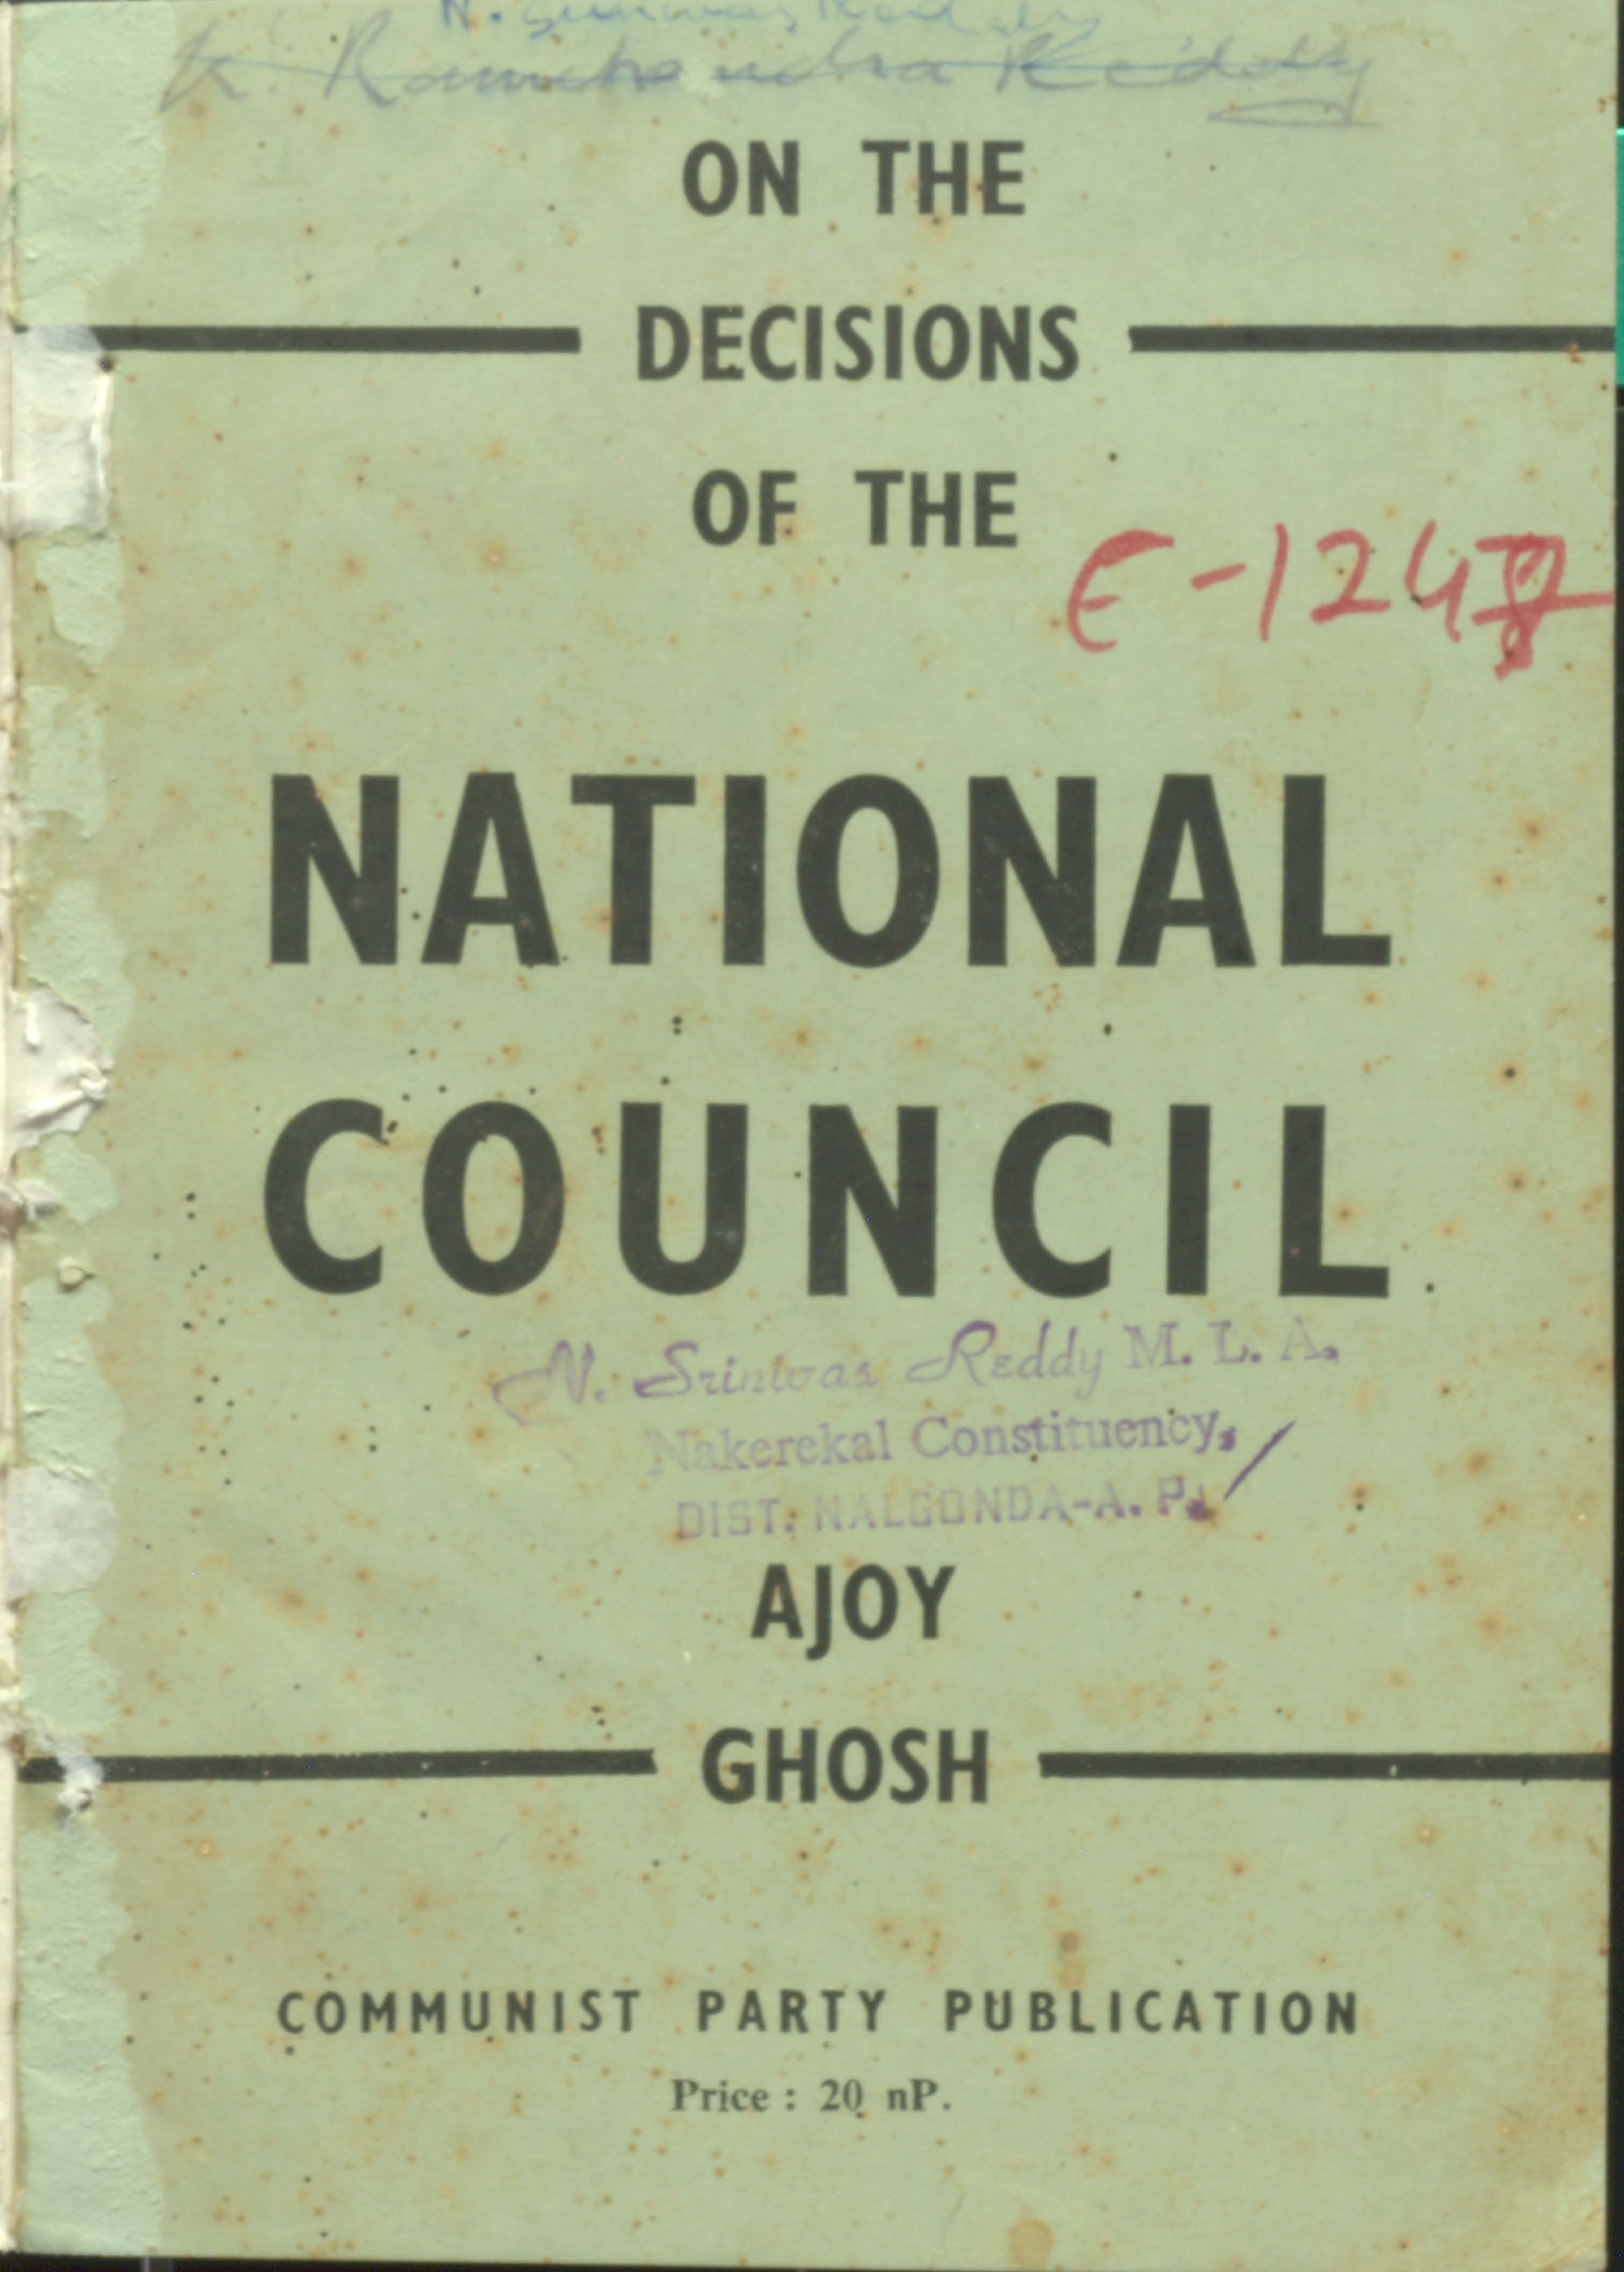 On The Decisions of the National Council